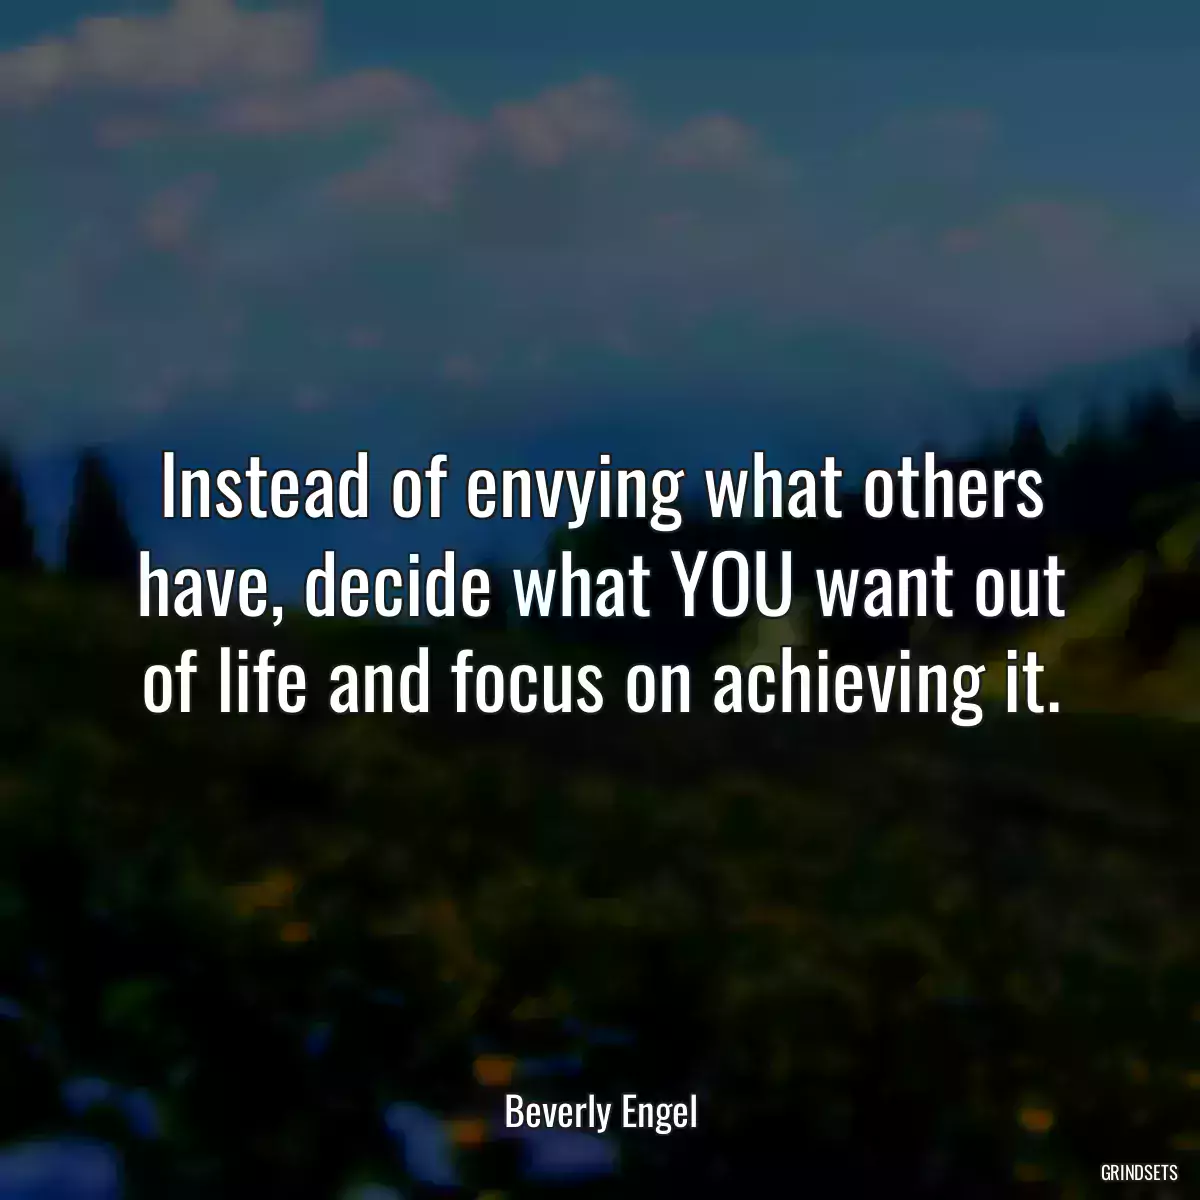 Instead of envying what others have, decide what YOU want out of life and focus on achieving it.